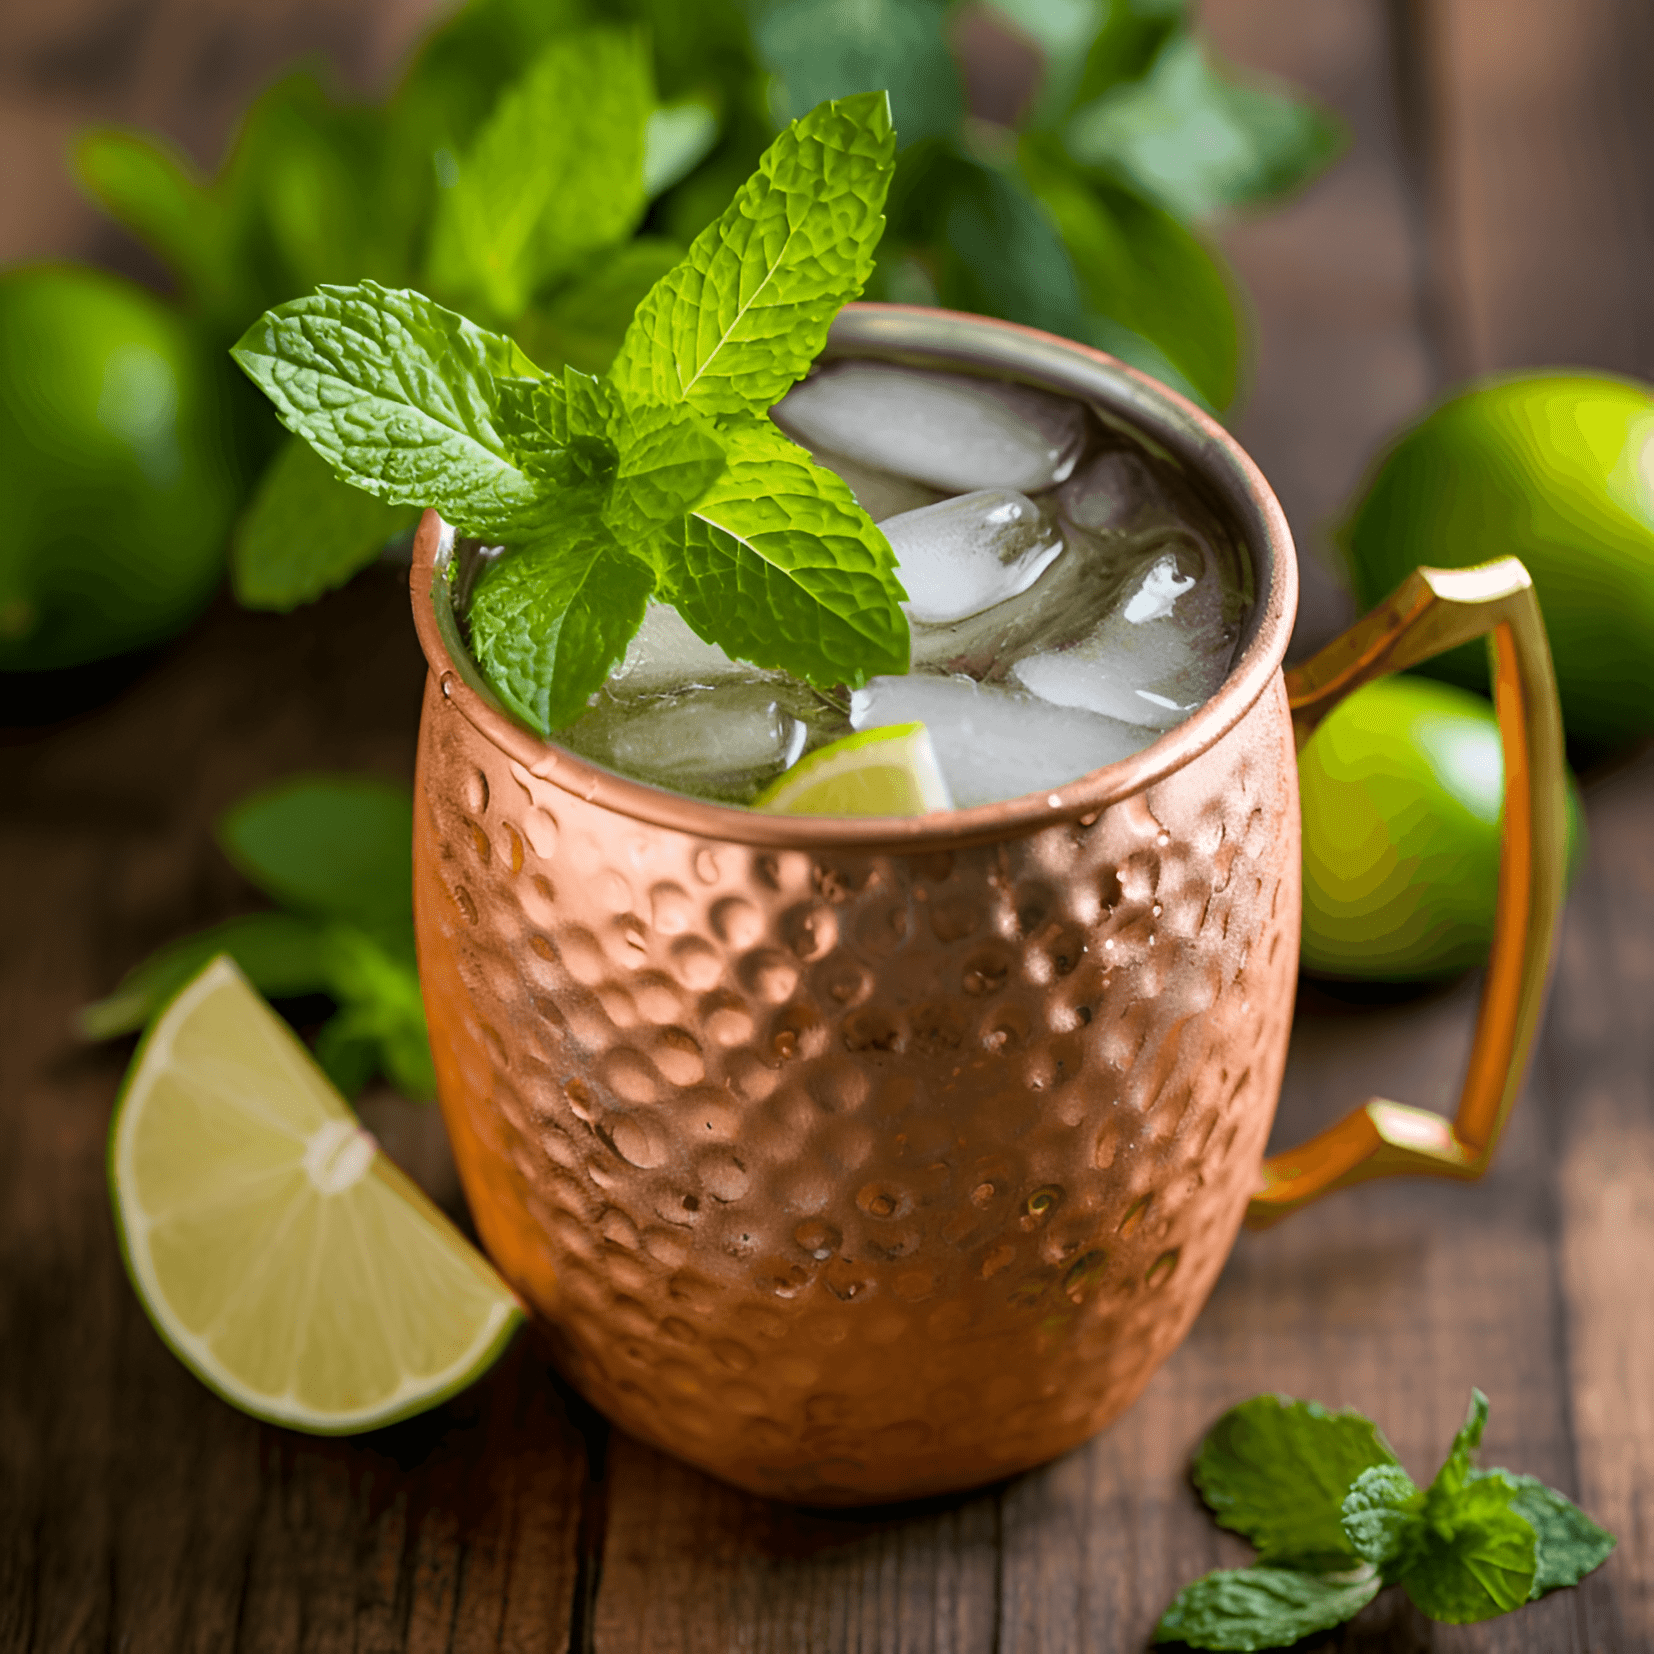 Kentucky Cocktail Recipe - The Kentucky cocktail has a bold, refreshing taste with a perfect balance of sweet, spicy, and sour flavors. The bourbon provides a rich, smoky base, while the ginger beer adds a spicy kick. The lime juice brings a tangy, citrus note to the drink, making it a well-rounded and satisfying cocktail.